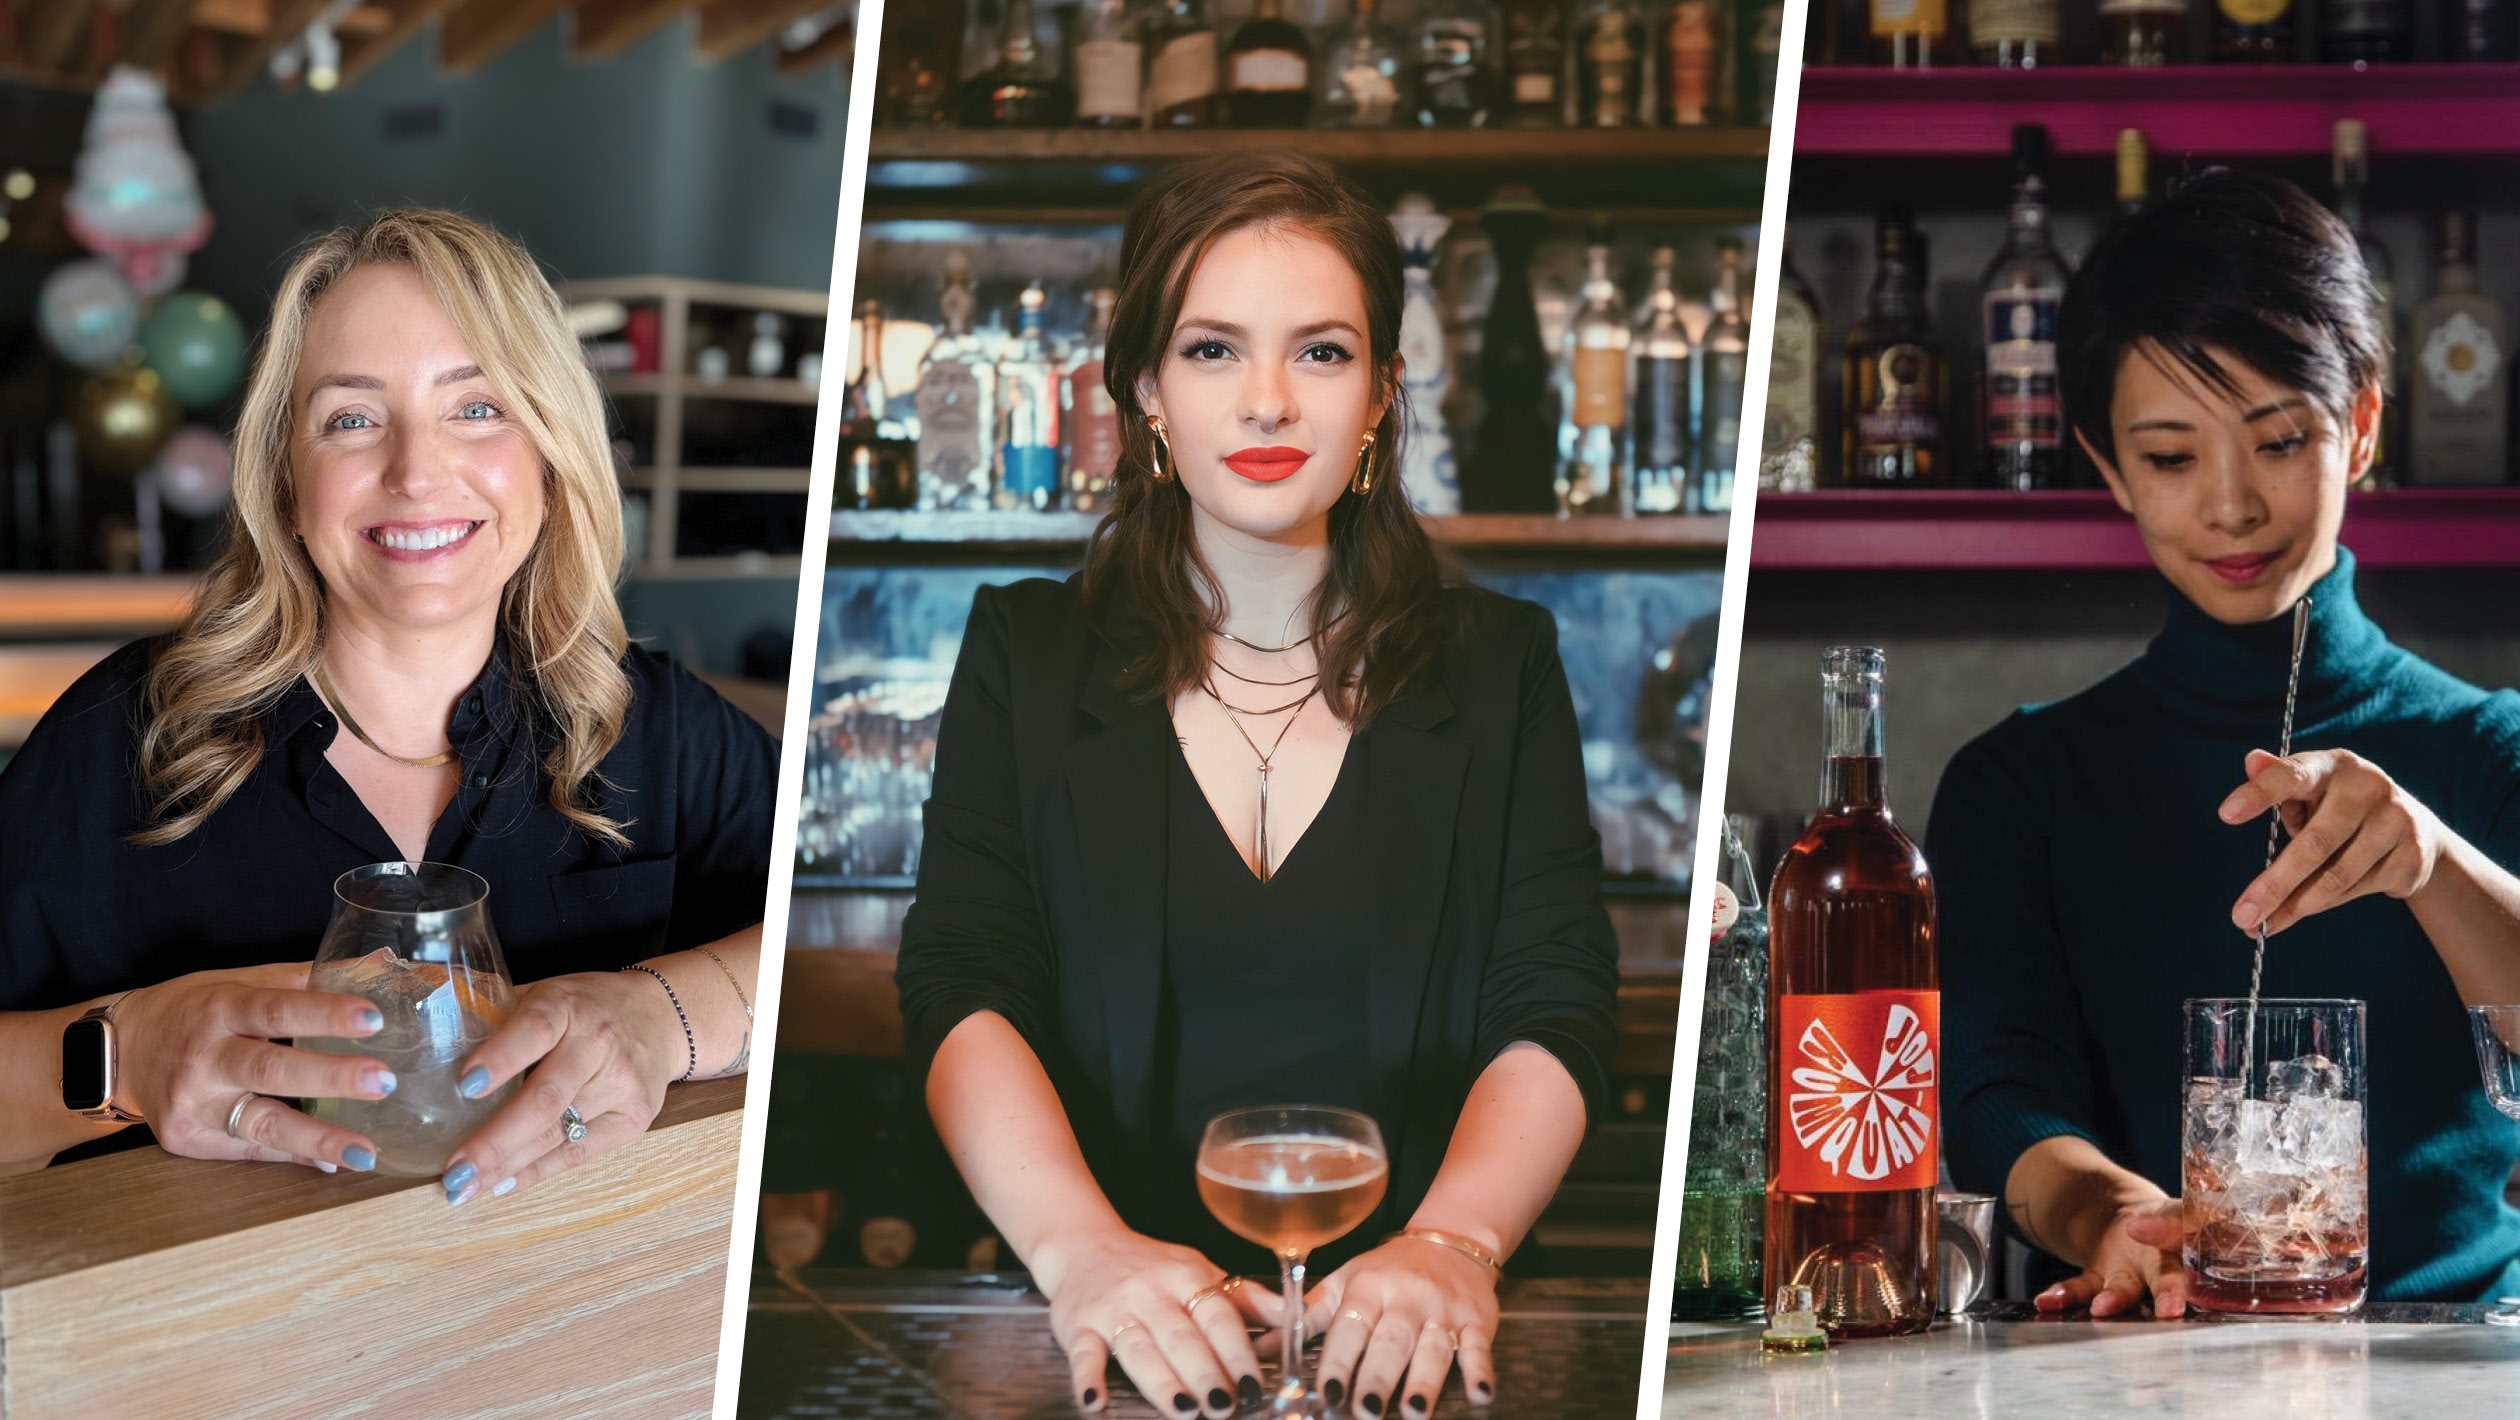 From left to right: Sara Gabriele, the owner of Gabi James (photo courtesy of Christina Montoya); Laura Unterberg, the beverage director of The Fox Bar and Country Club (photo courtesy of Laura Unterberg); Carolyn Kao, a Bay Area bar manager (photo by Nicola Par).